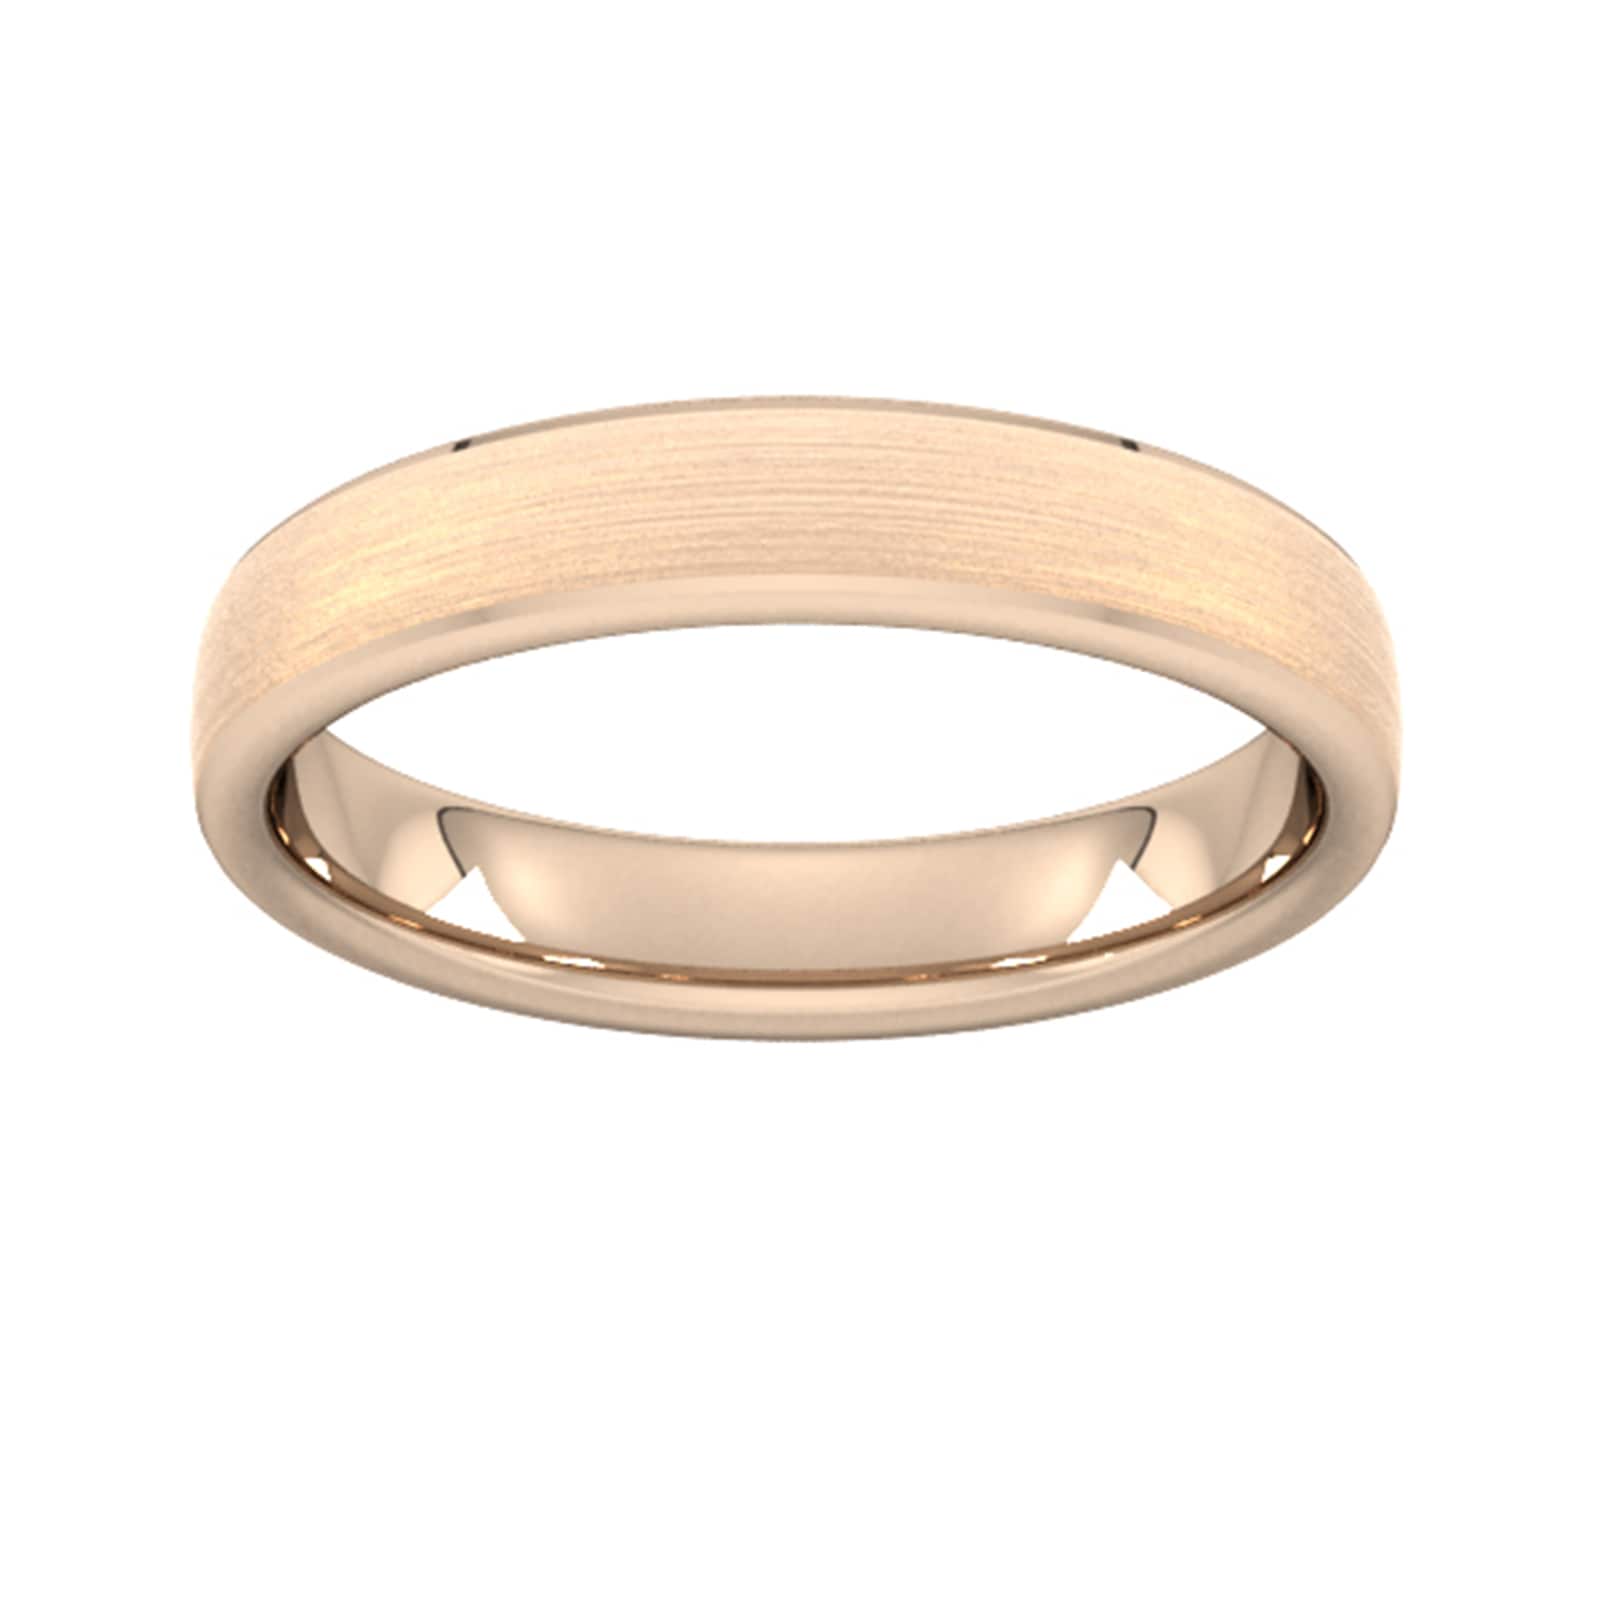 4mm Slight Court Extra Heavy Polished Chamfered Edges With Matt Centre Wedding Ring In 9 Carat Rose Gold - Ring Size R